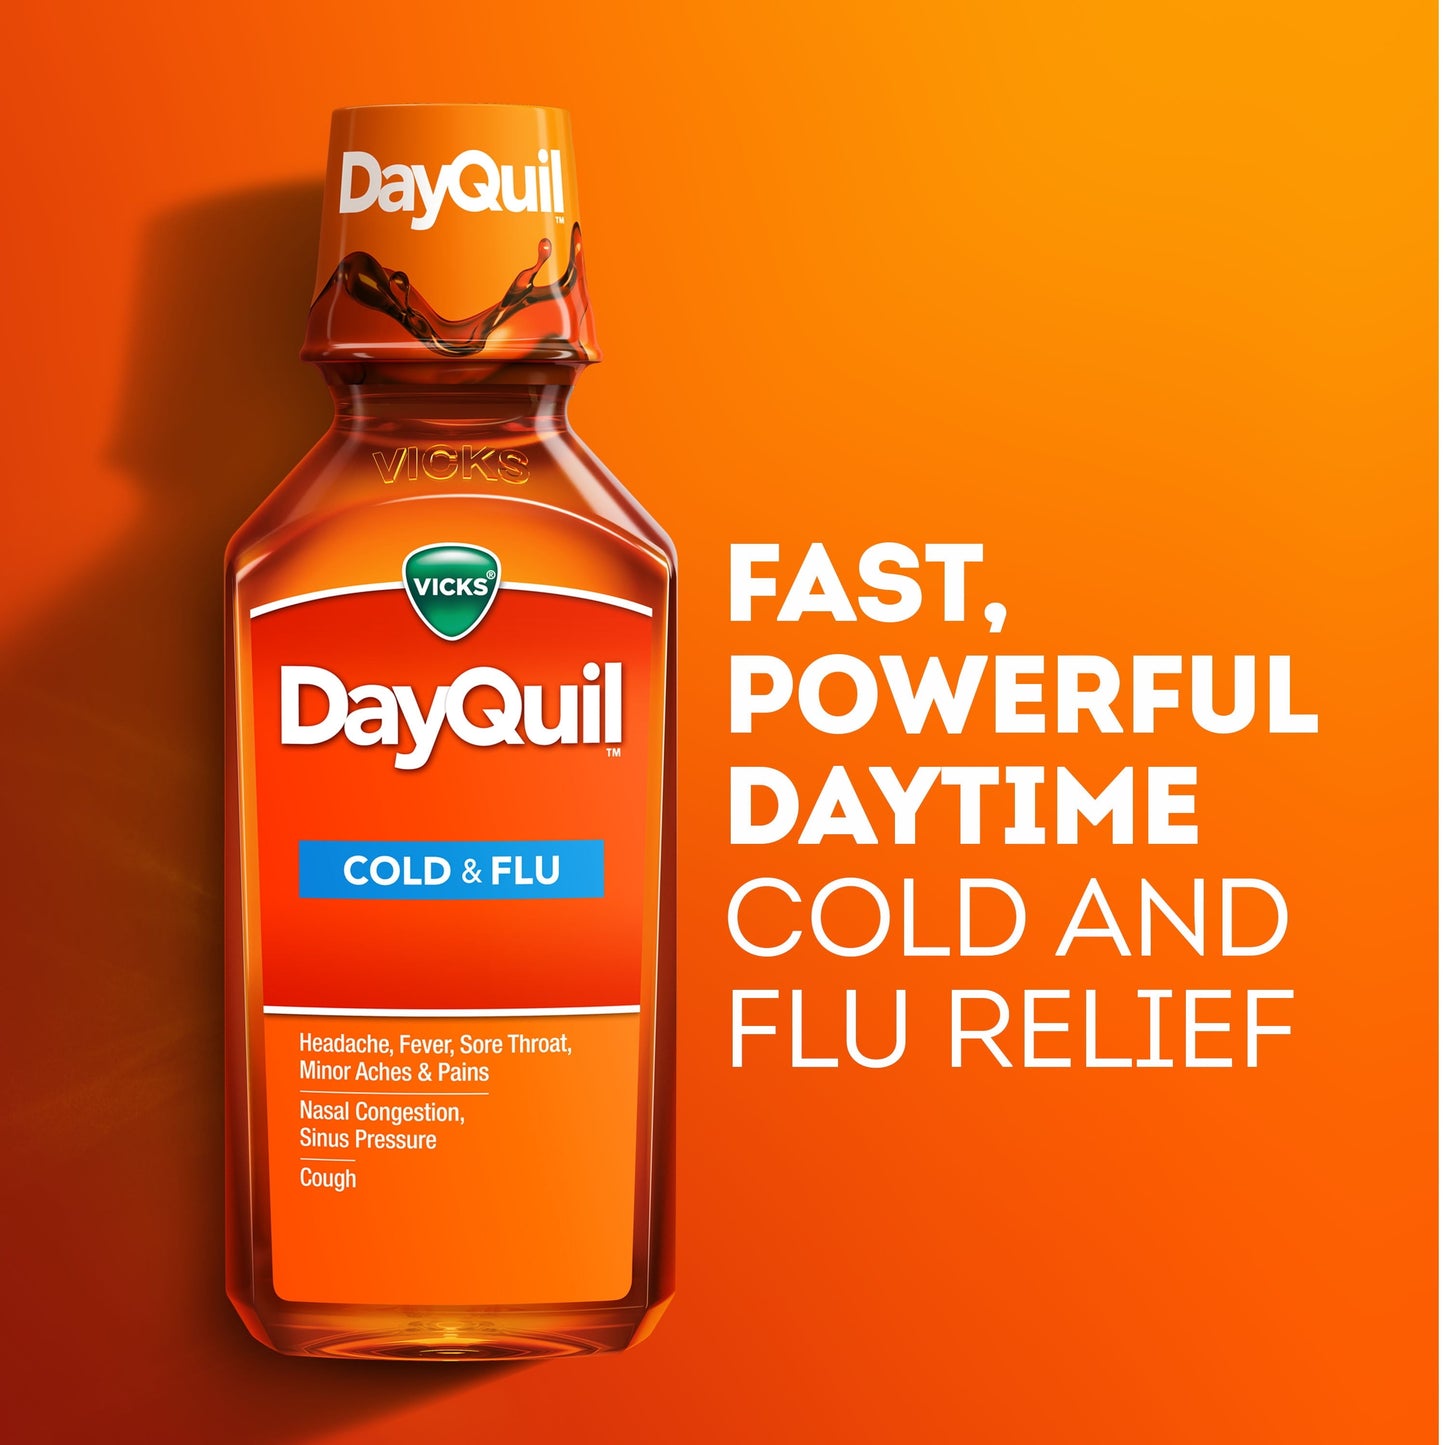 Vicks DayQuil Daytime Cold, Cough and Flu Liquid Medicine, over-the-Counter Medicine, 12 fl. oz.